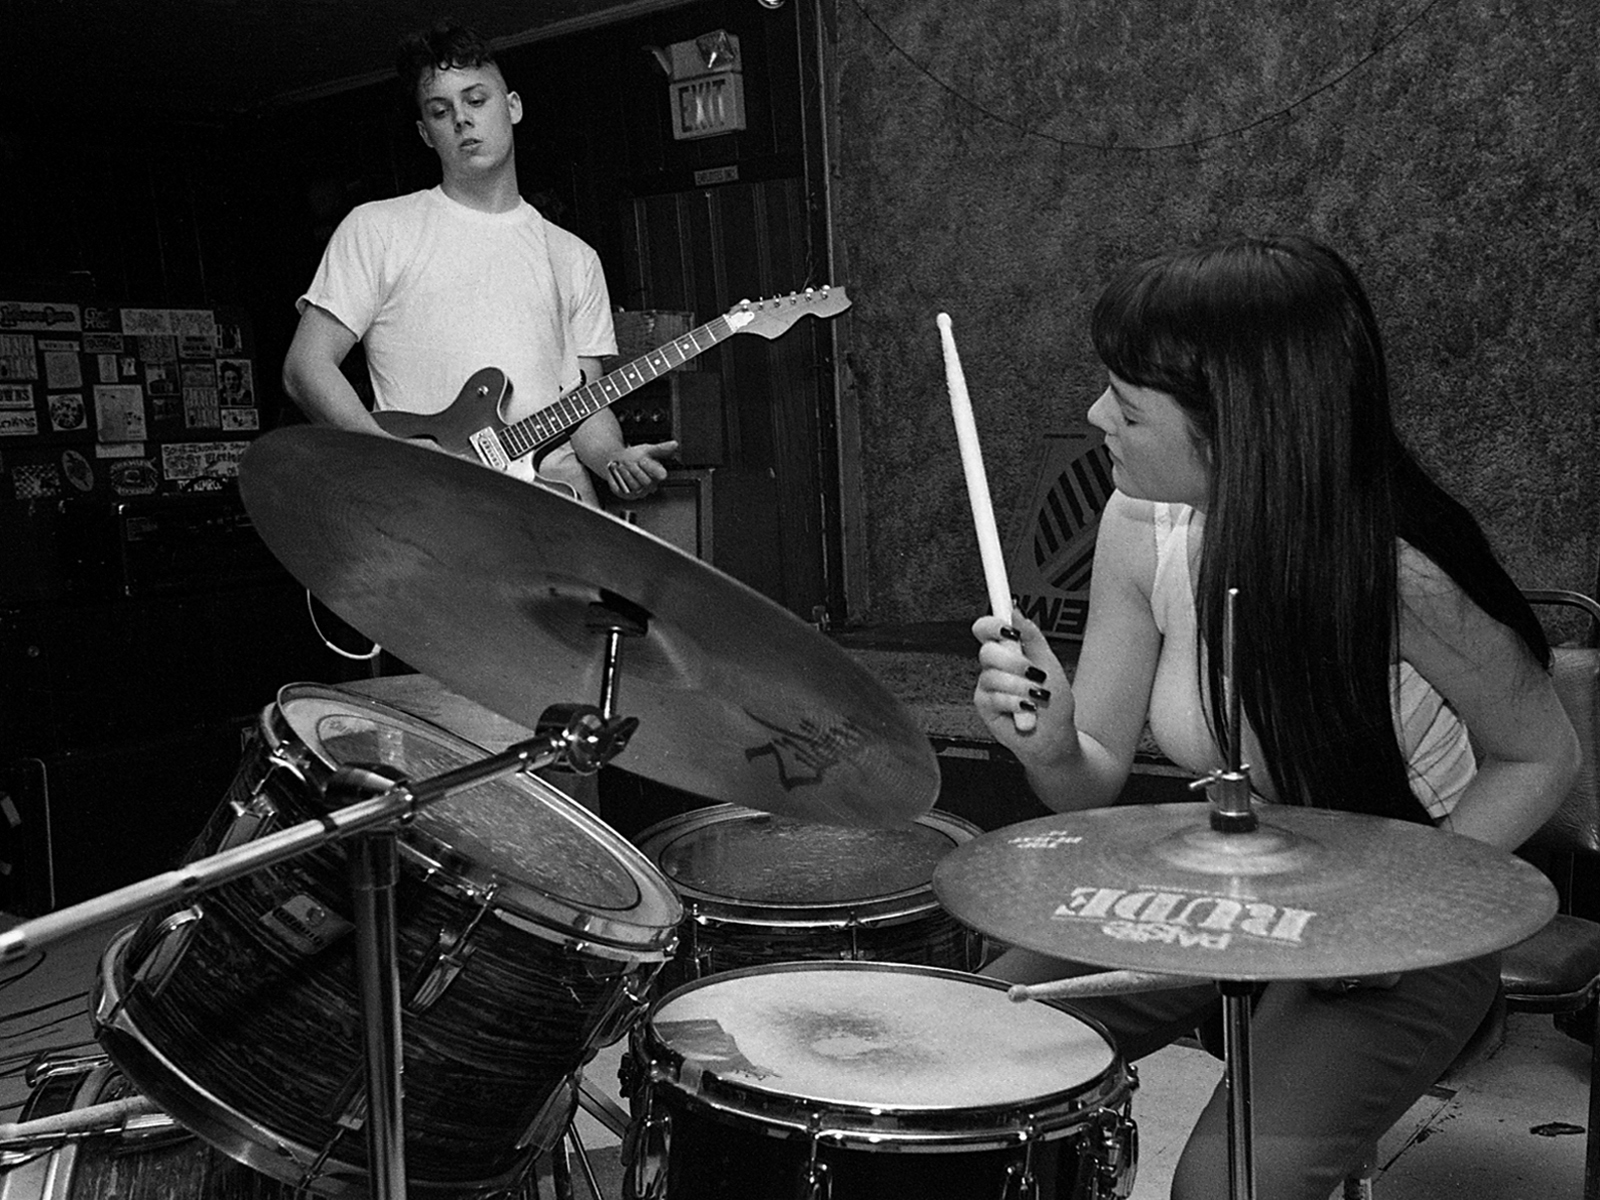 The White Stripes at Pat's in the Flats in Cleveland, Ohio, 1998